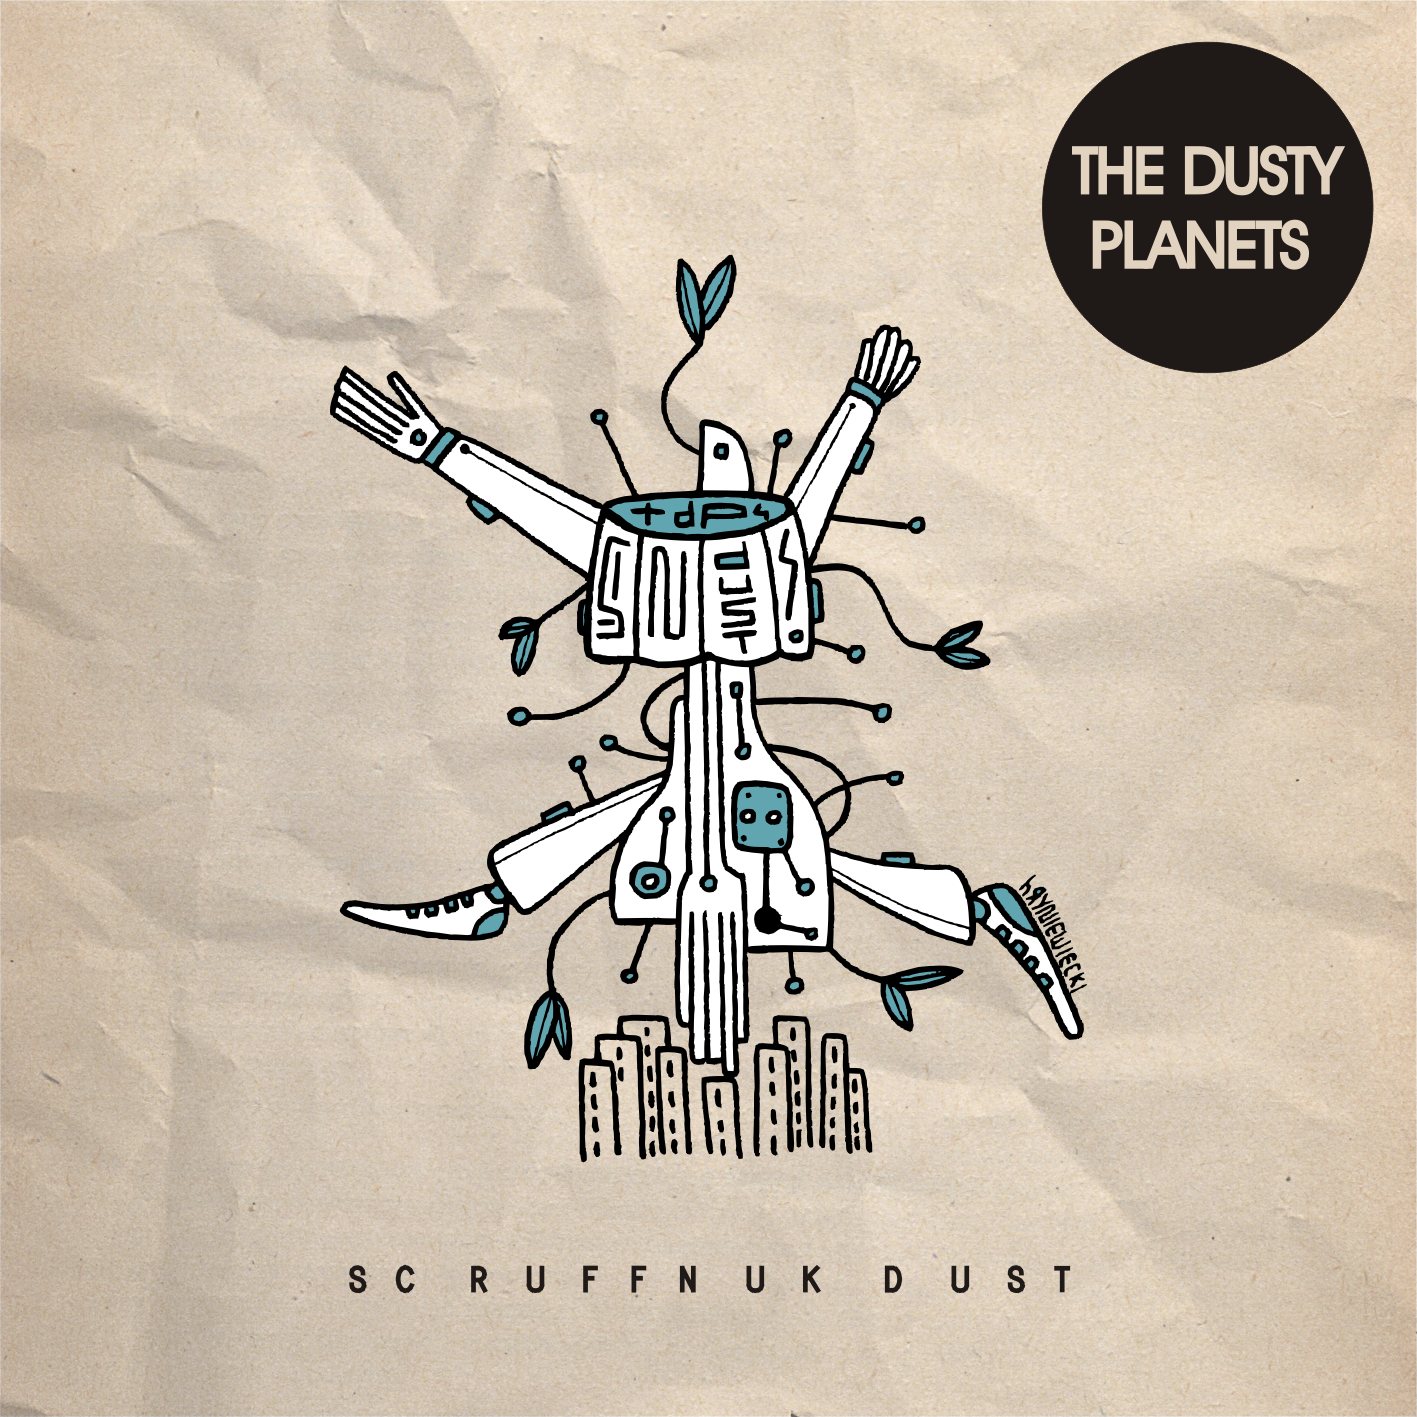 Free Download: Scruffnuk Dust – The Dusty Planets